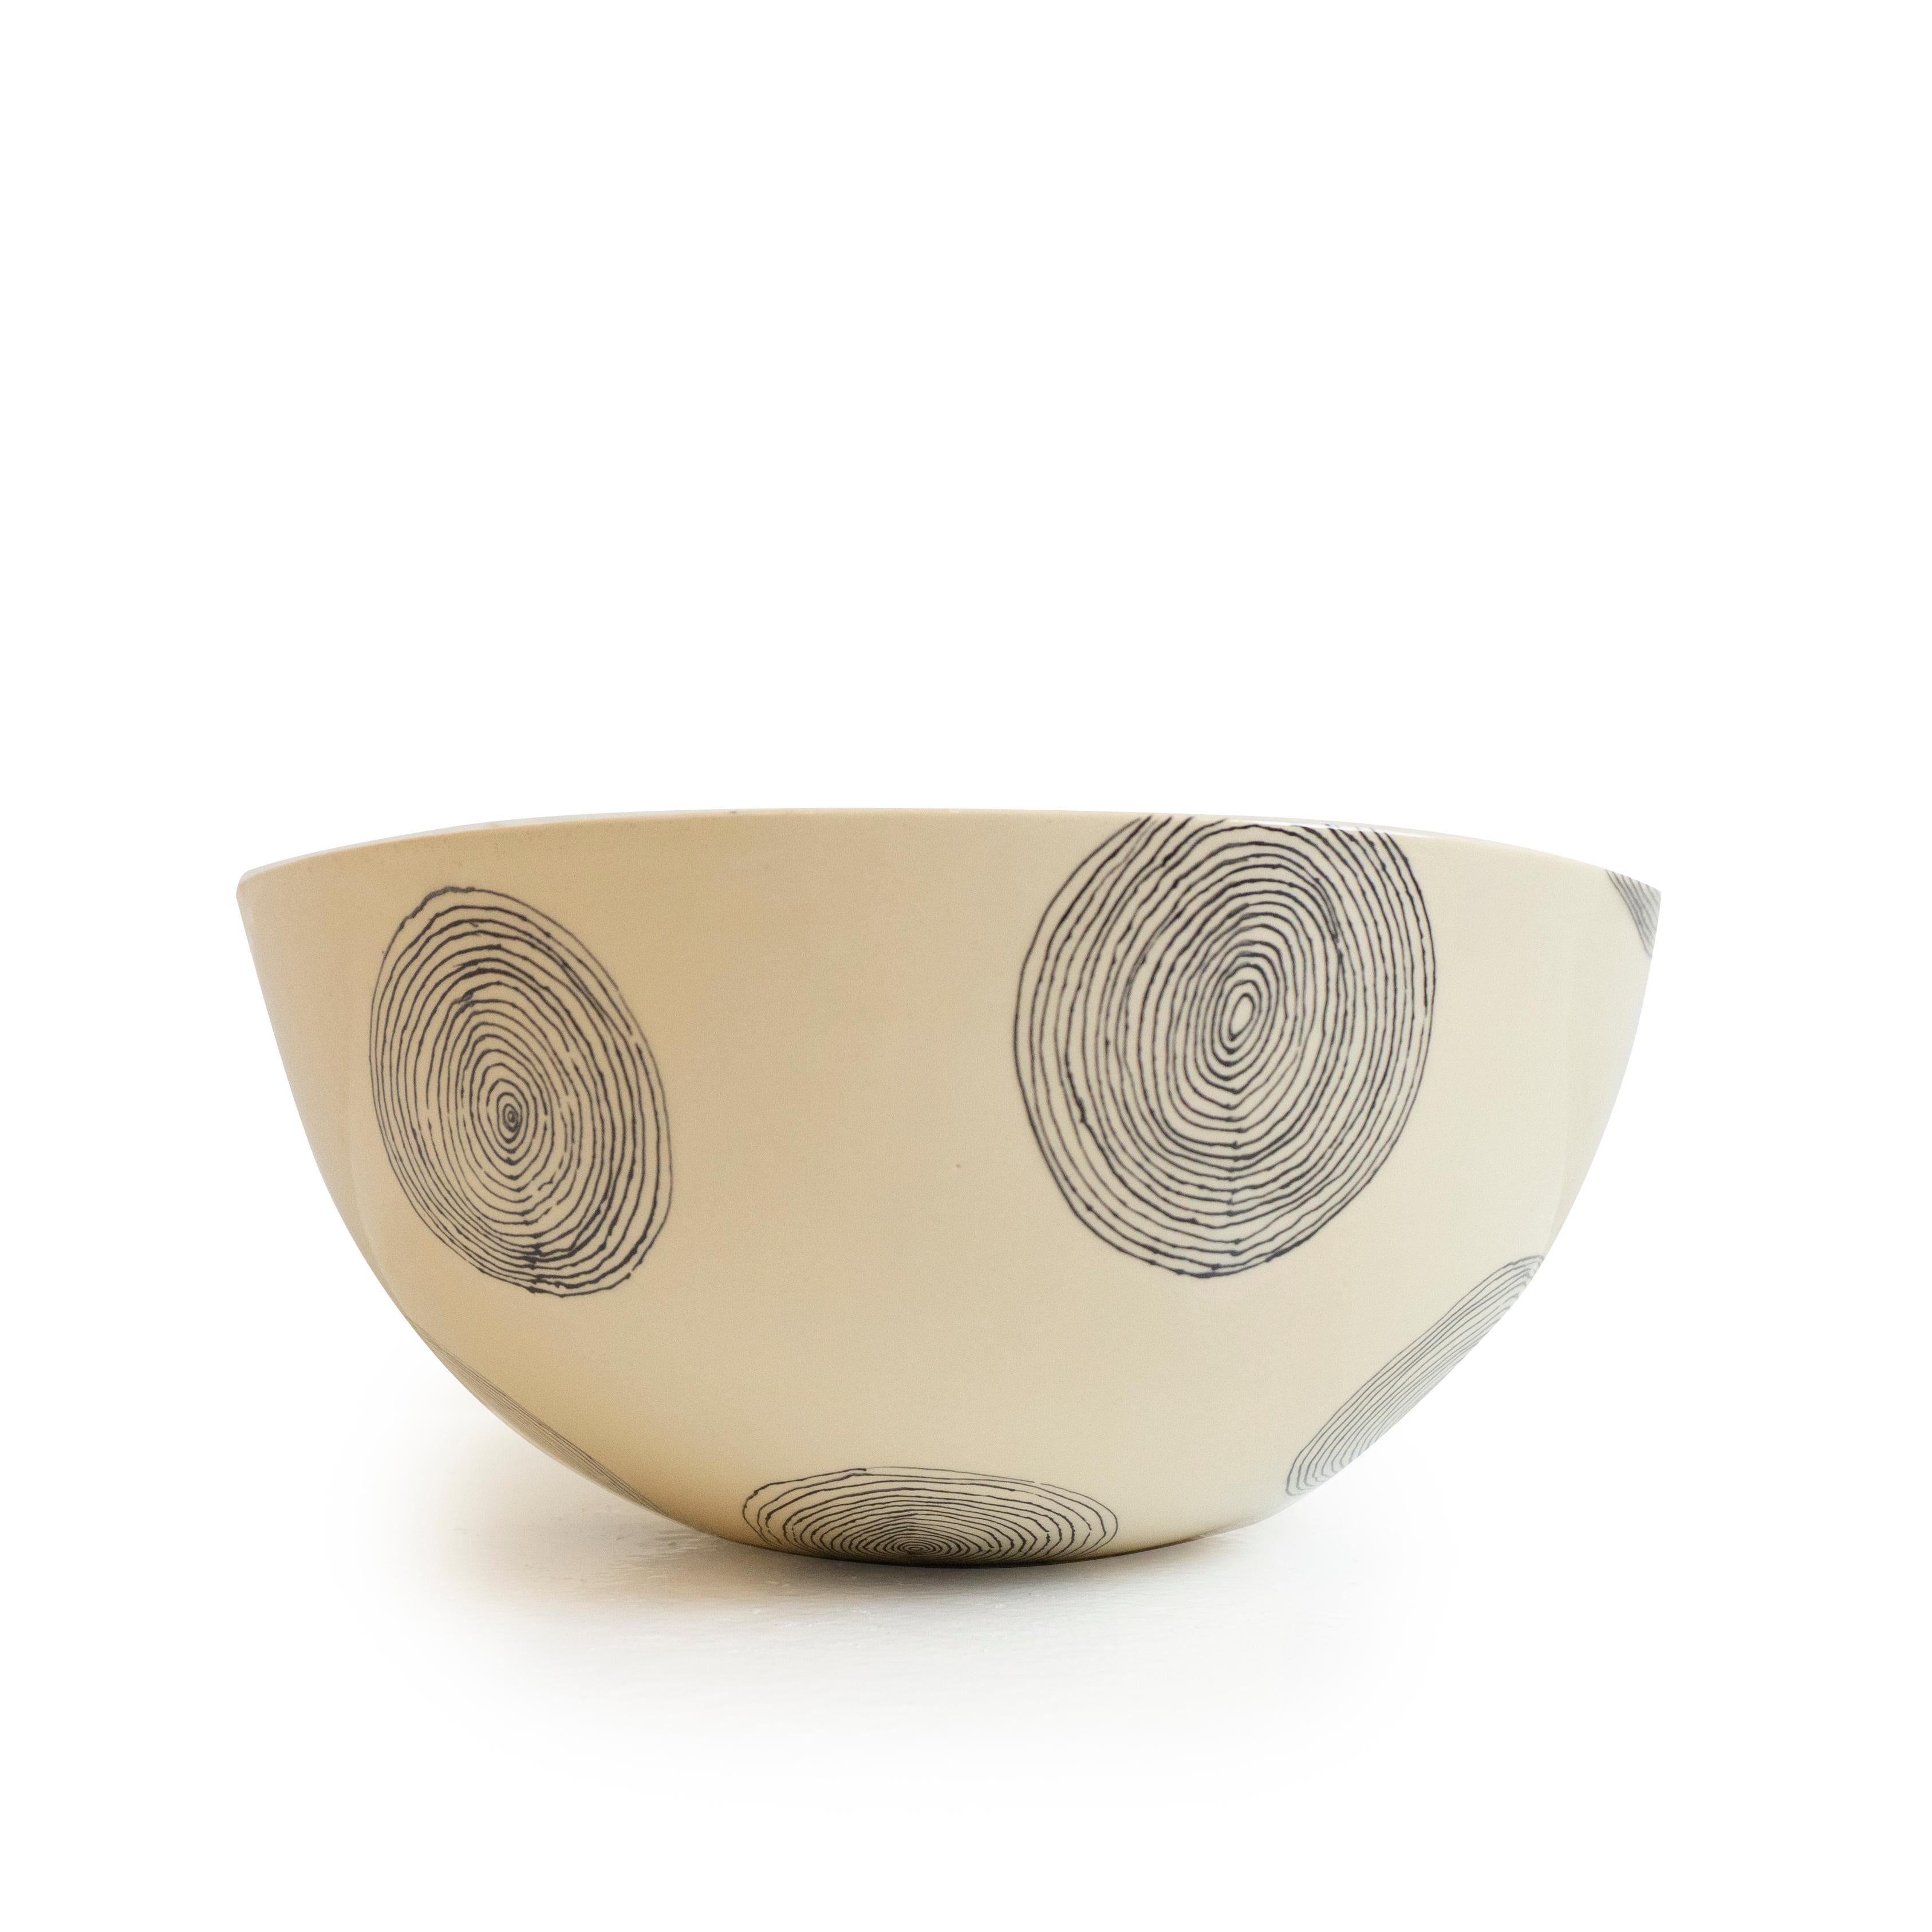 This handcrafted ceramic bowl from Paris is completely handmade. From the hand beating of the clay to the drawn illustration each bowl is meticulously crafted. This bowl is made from natural clay resulting in slightly different hues from one piece